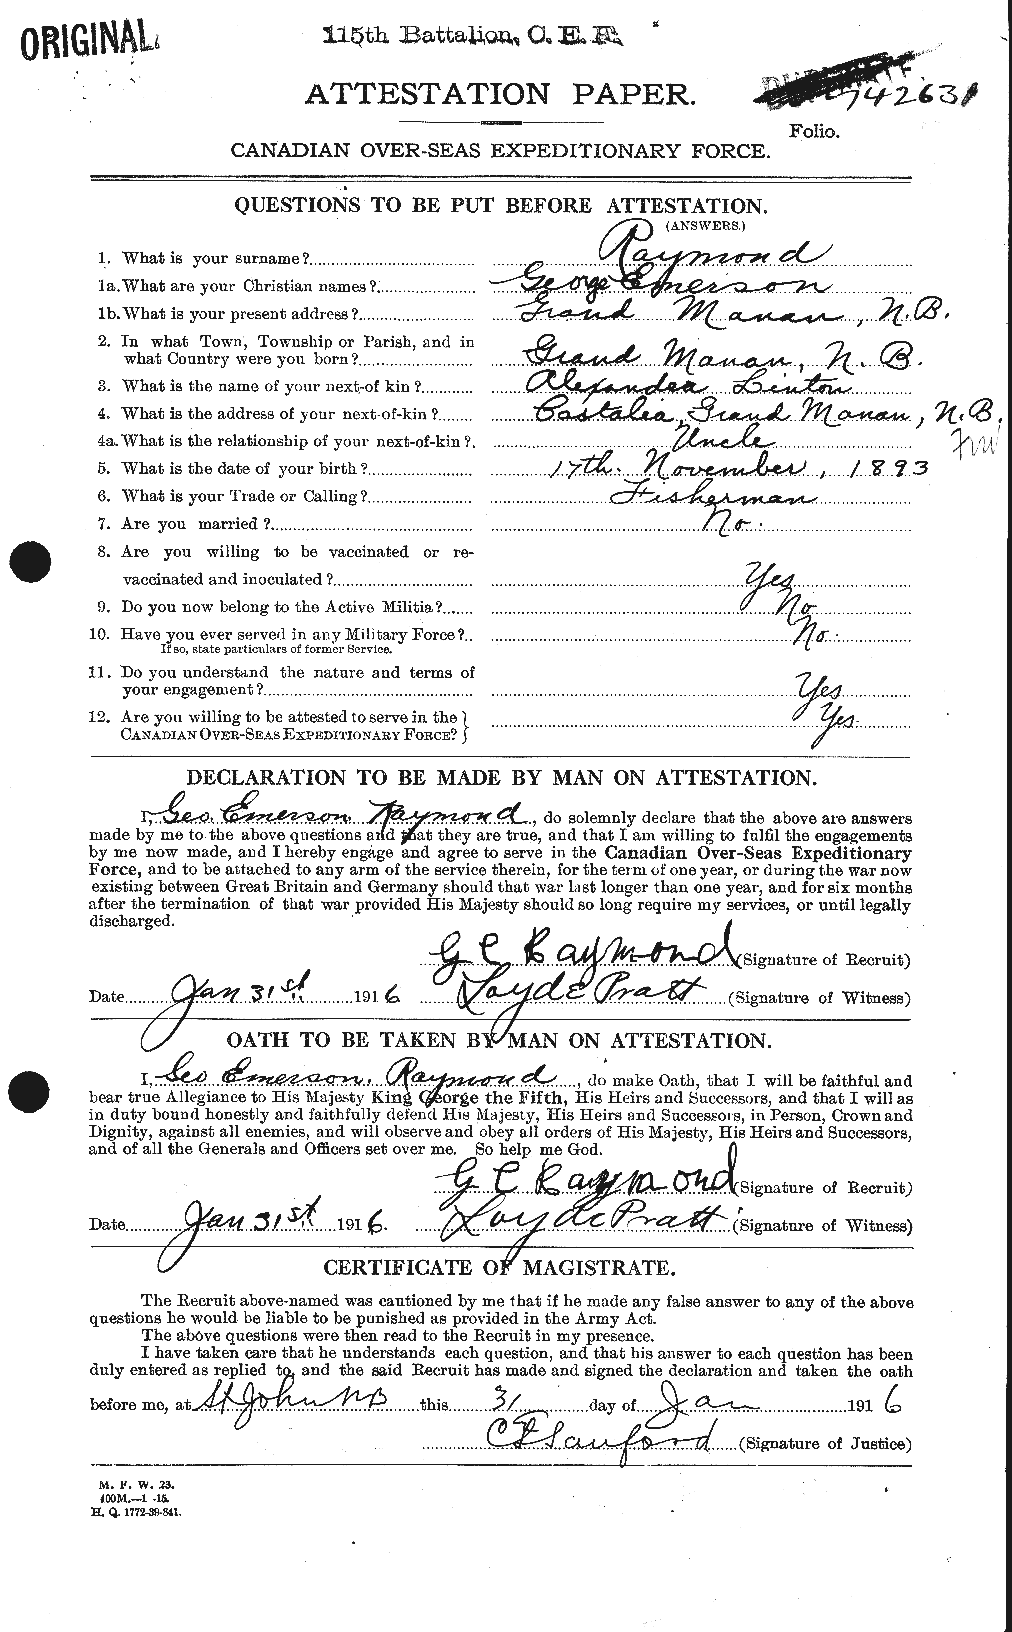 Personnel Records of the First World War - CEF 595343a